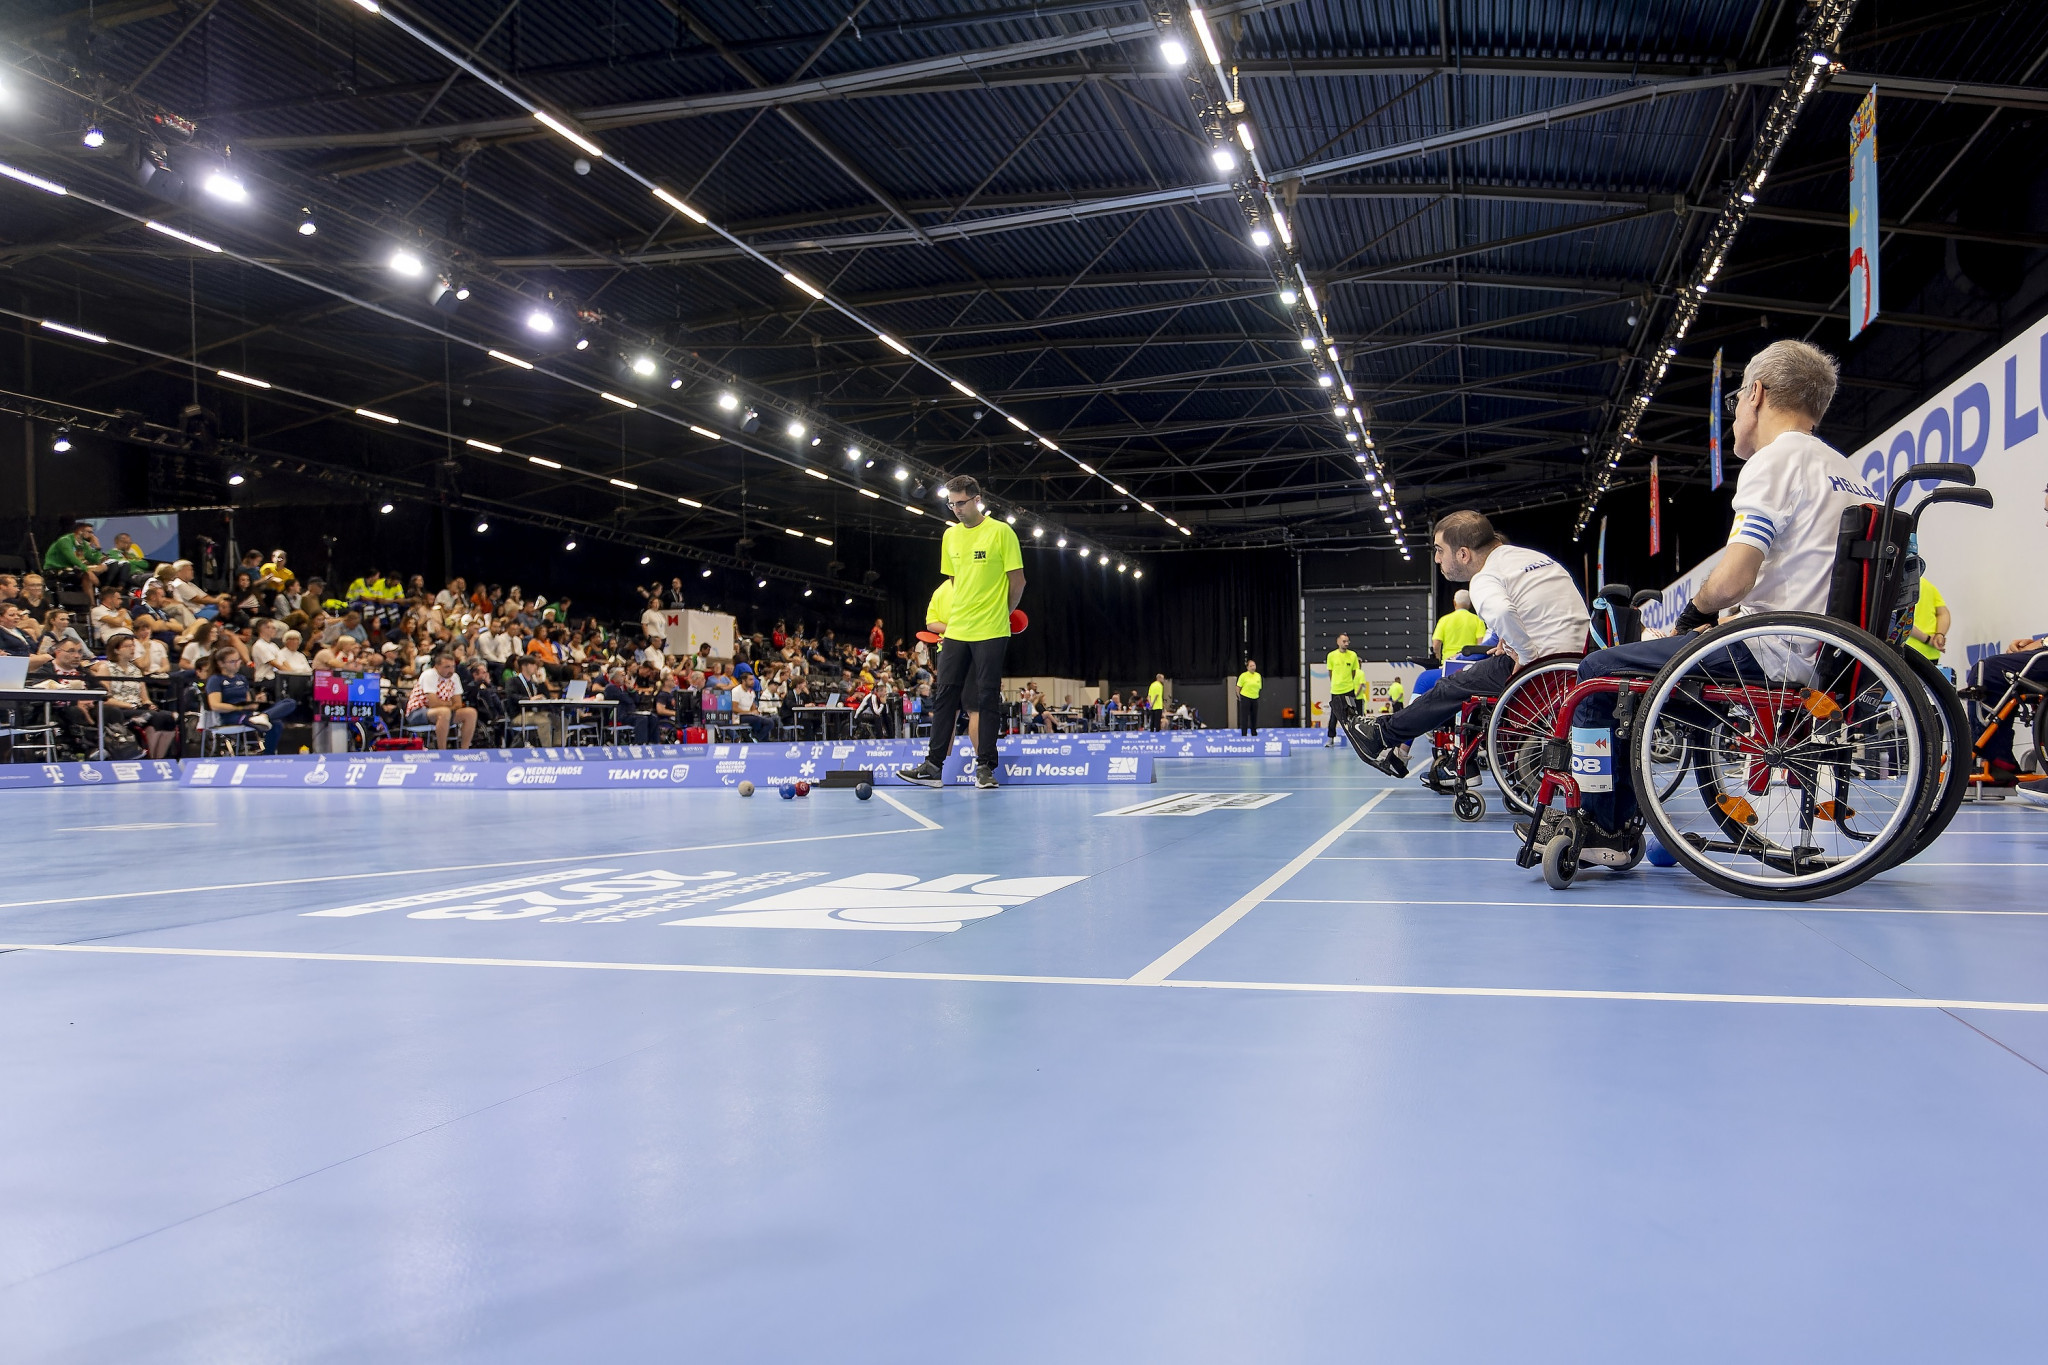 It was last day of boccia action at the Rotterham Ahoy with the finals set to be held at the Schouwburgplein over the weekend ©EPC